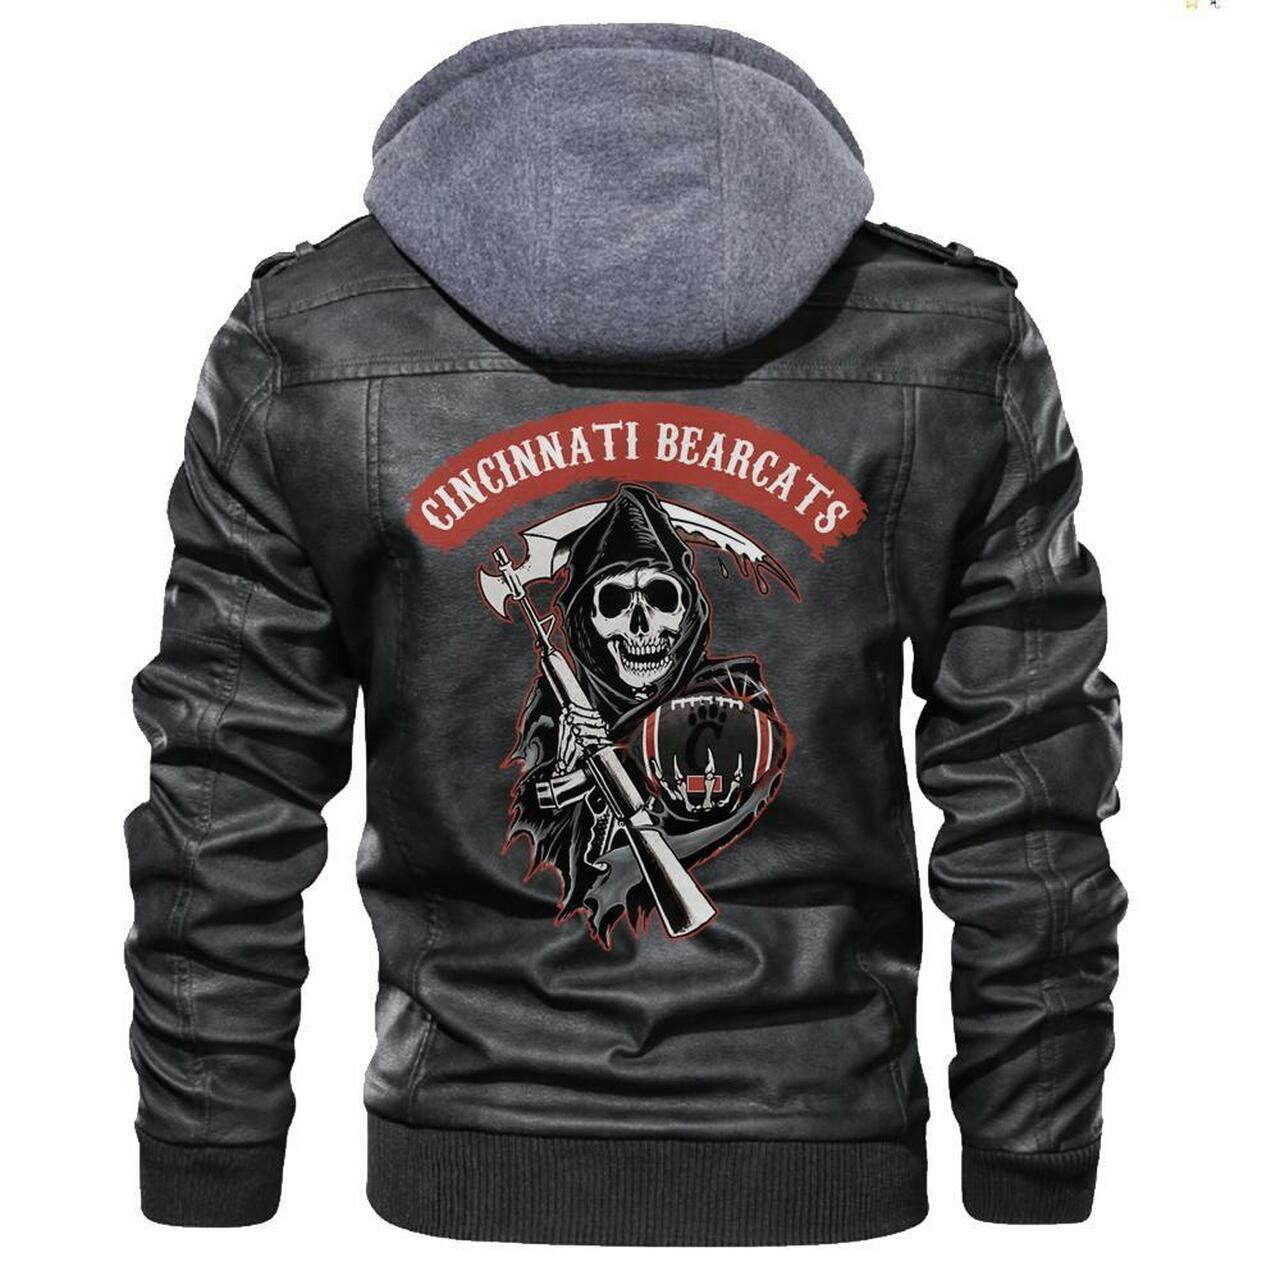 Our store has all of the latest leather jacket 74